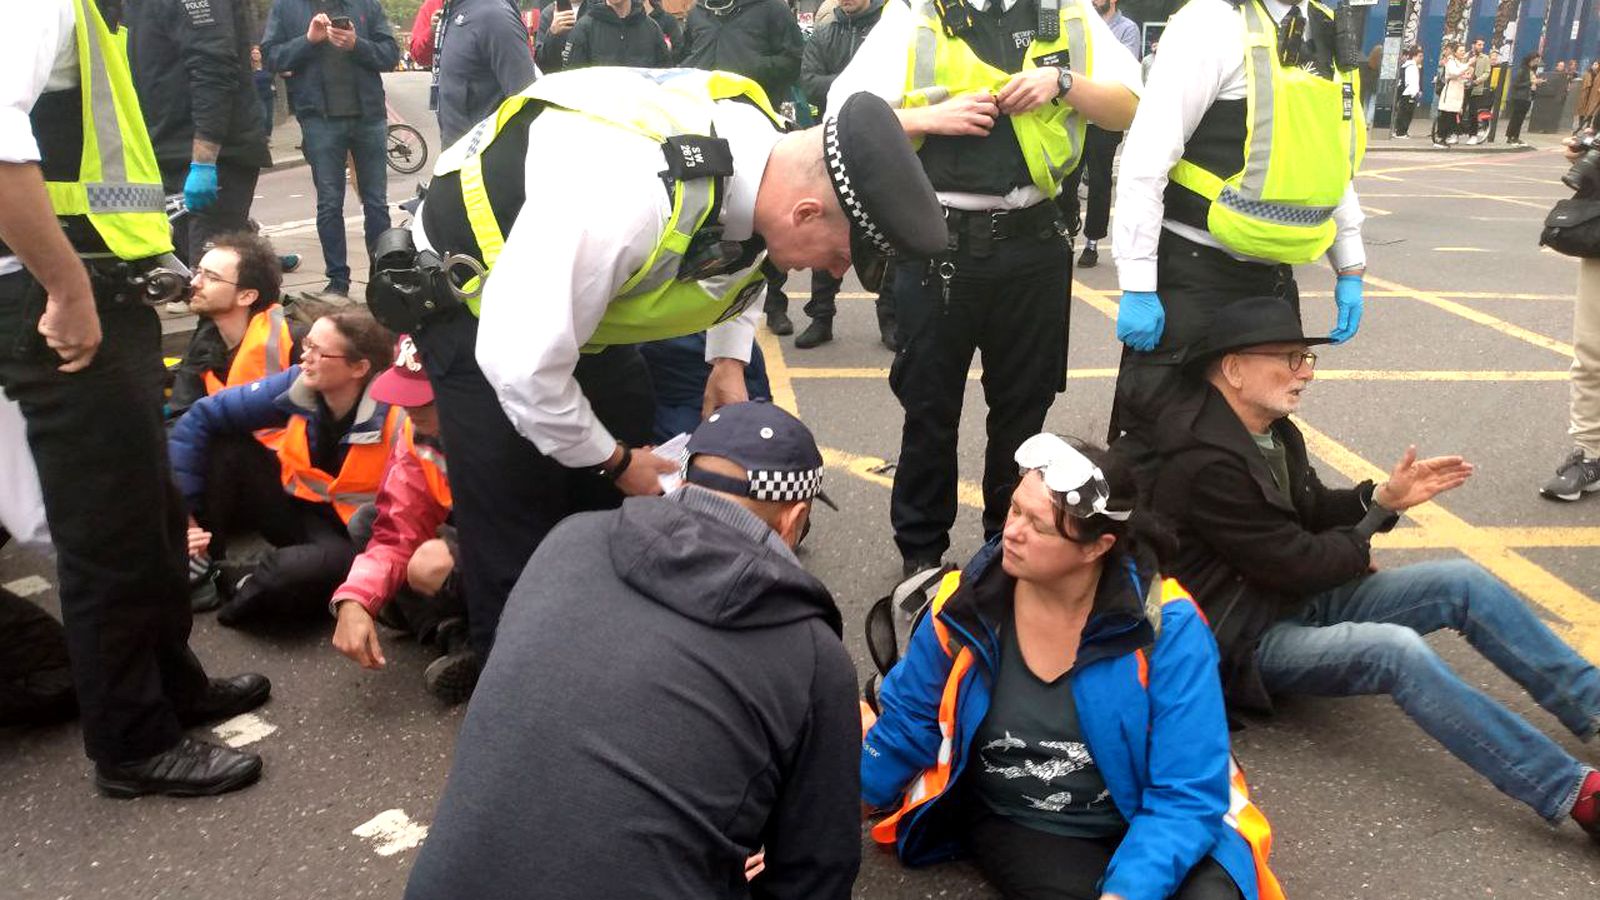 Just Stop Oil protesters clash with public after blocking road in London as 26 arrested